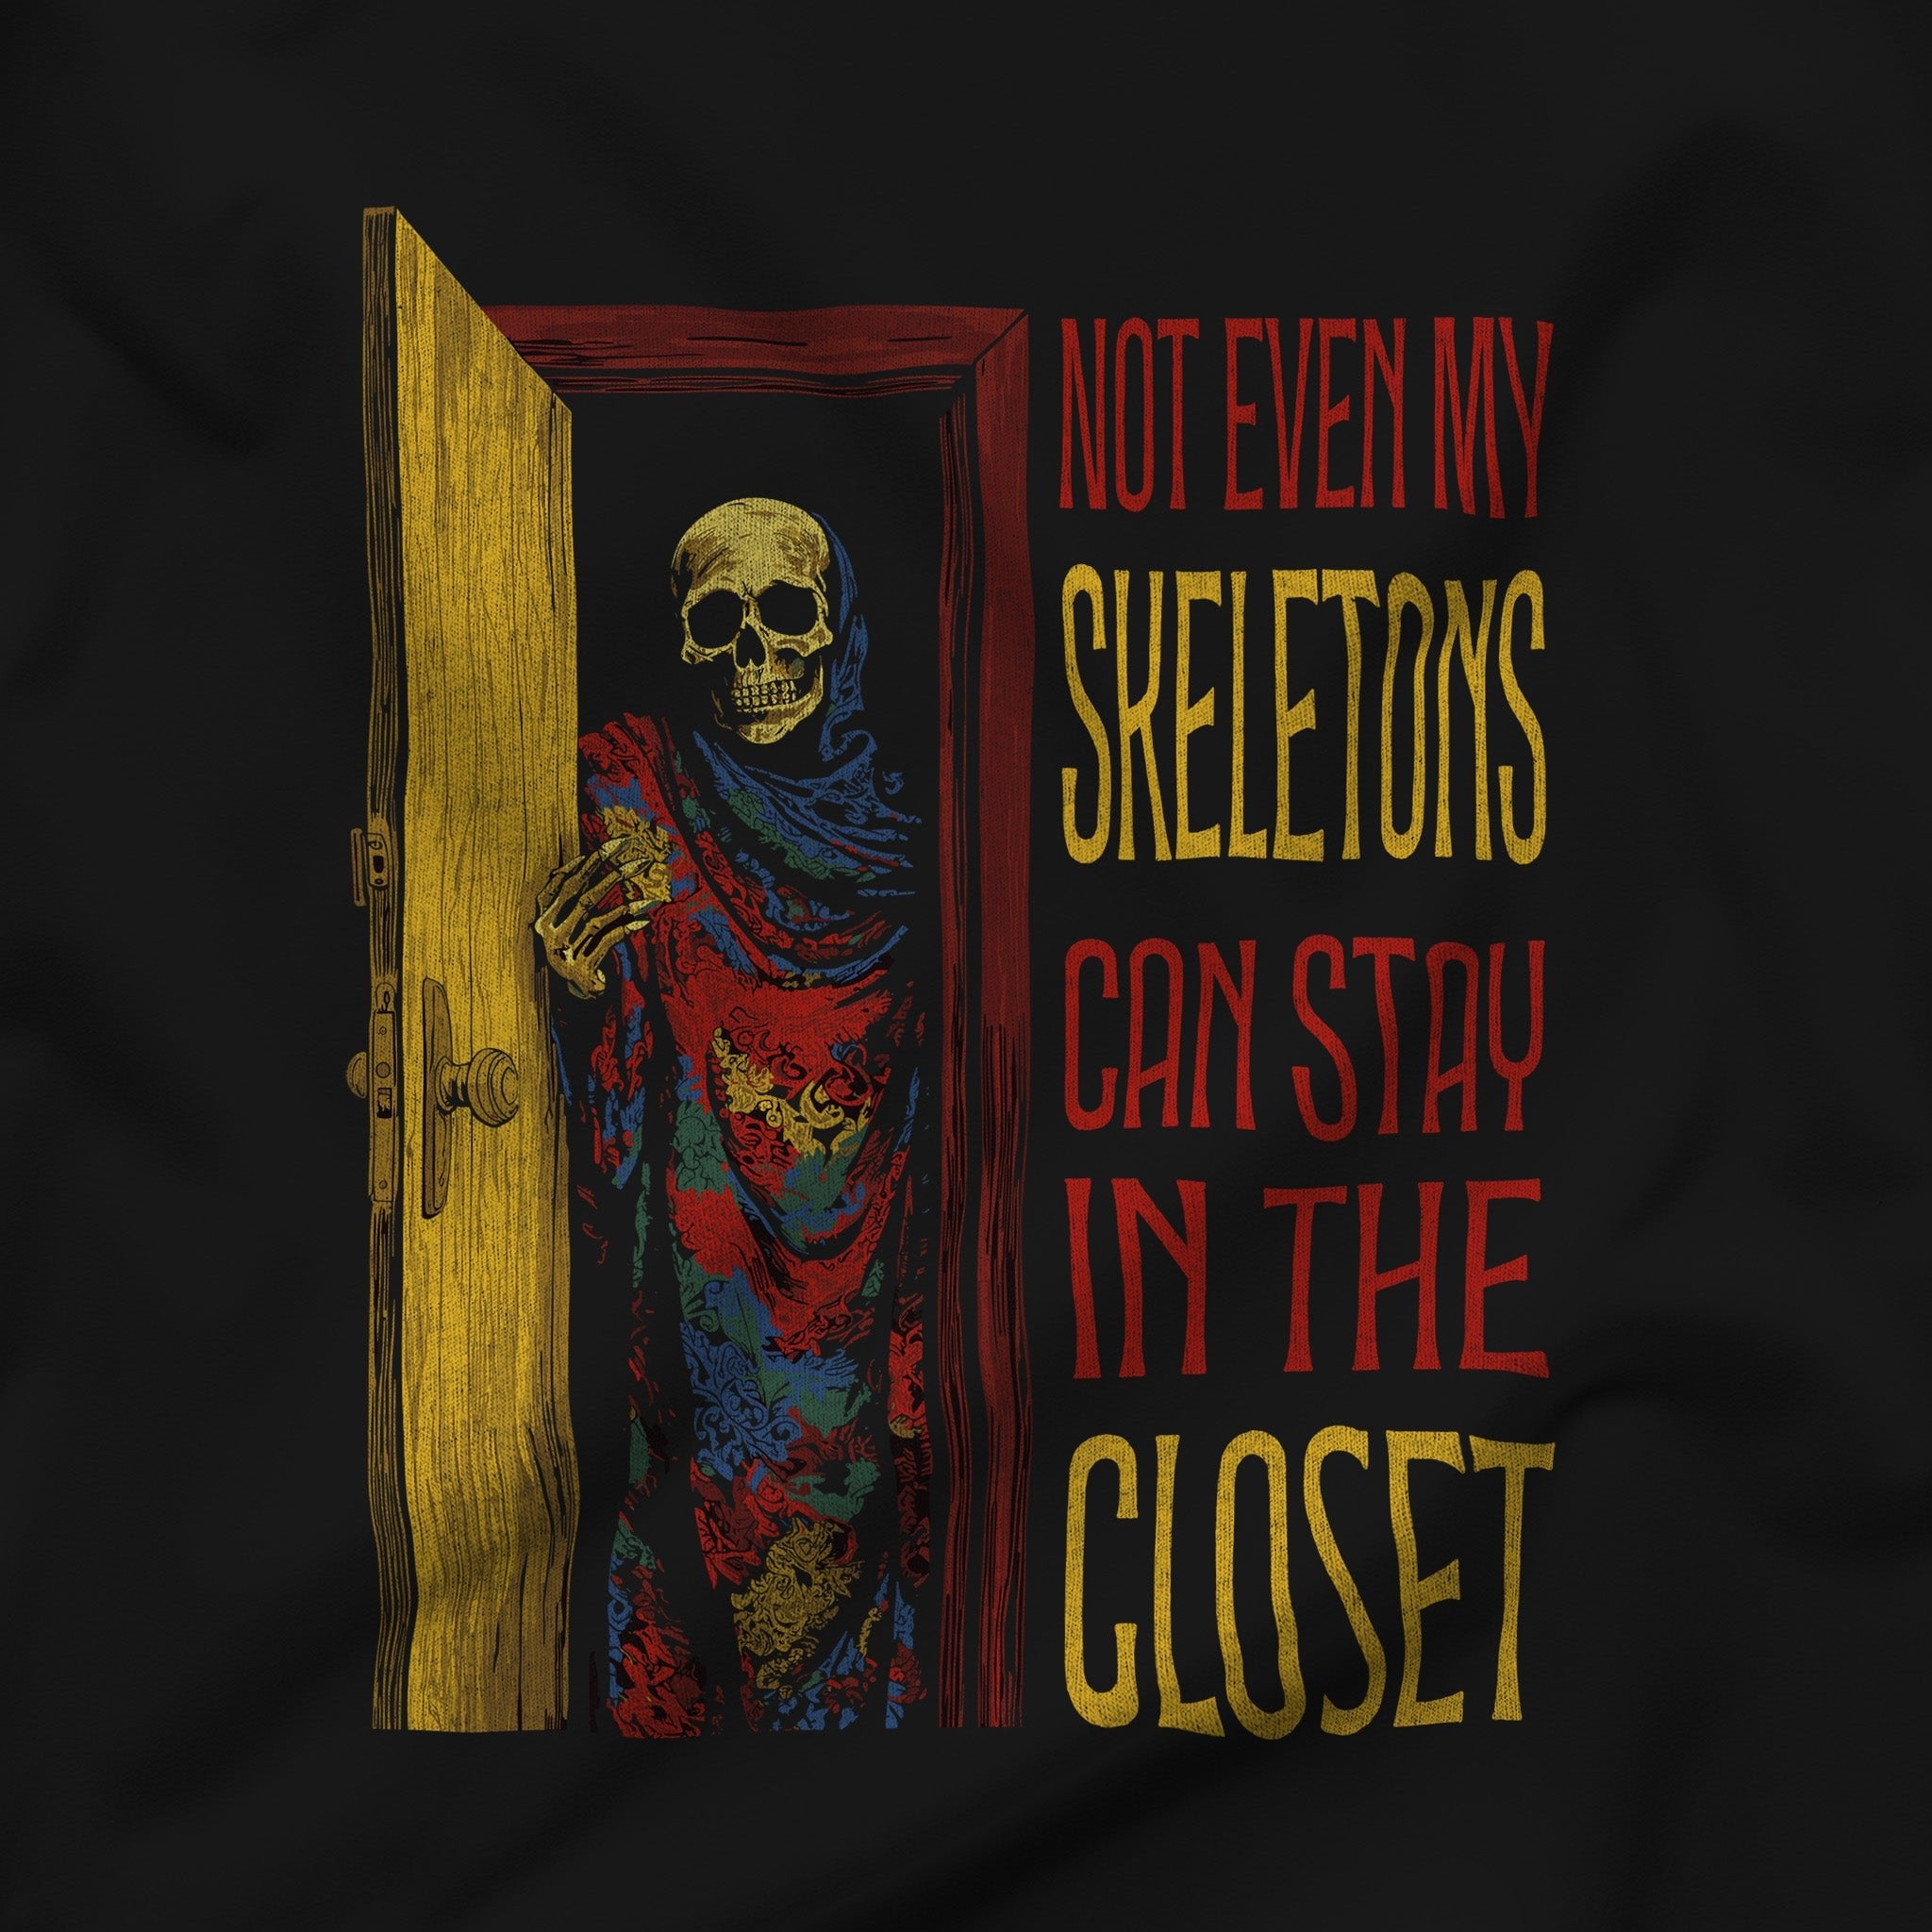 "Not Even My Skeletons Can Stay in the Closet" Gay Halloween Sweatshirt - Hunky Tops